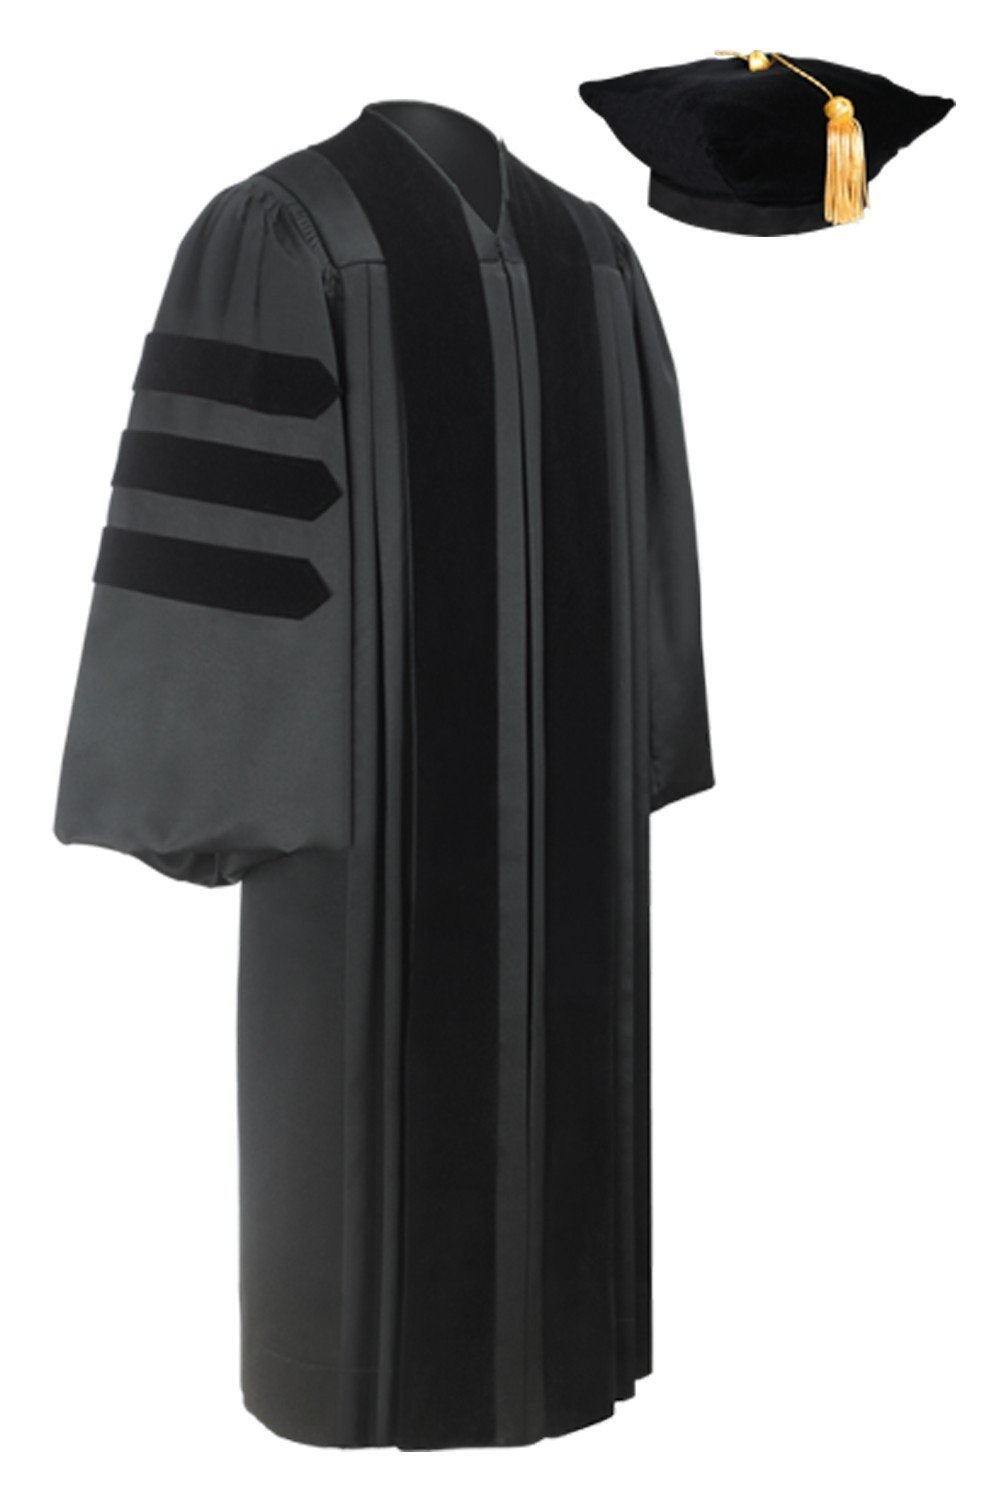 Deluxe Doctoral Graduation Tam & Gown Package - Graduation Cap and Gown